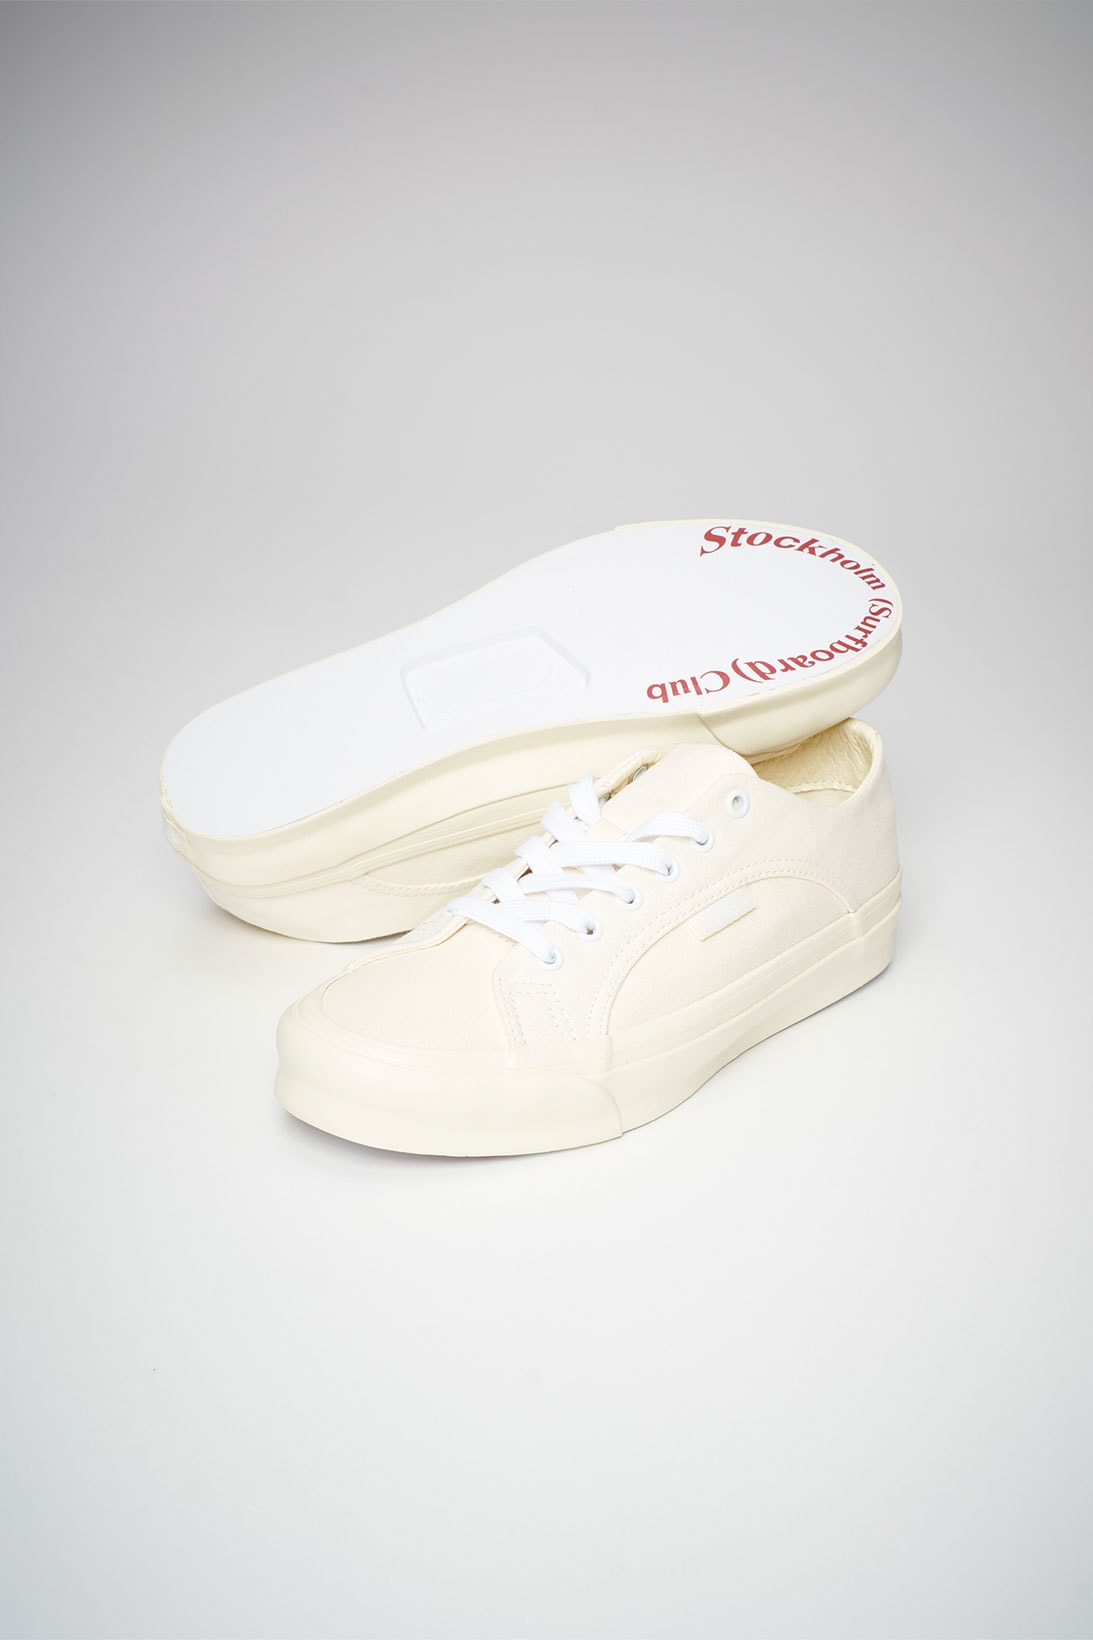 Stockholm Surfboard Club Vans Lampin Collaboration Sneakers Release 